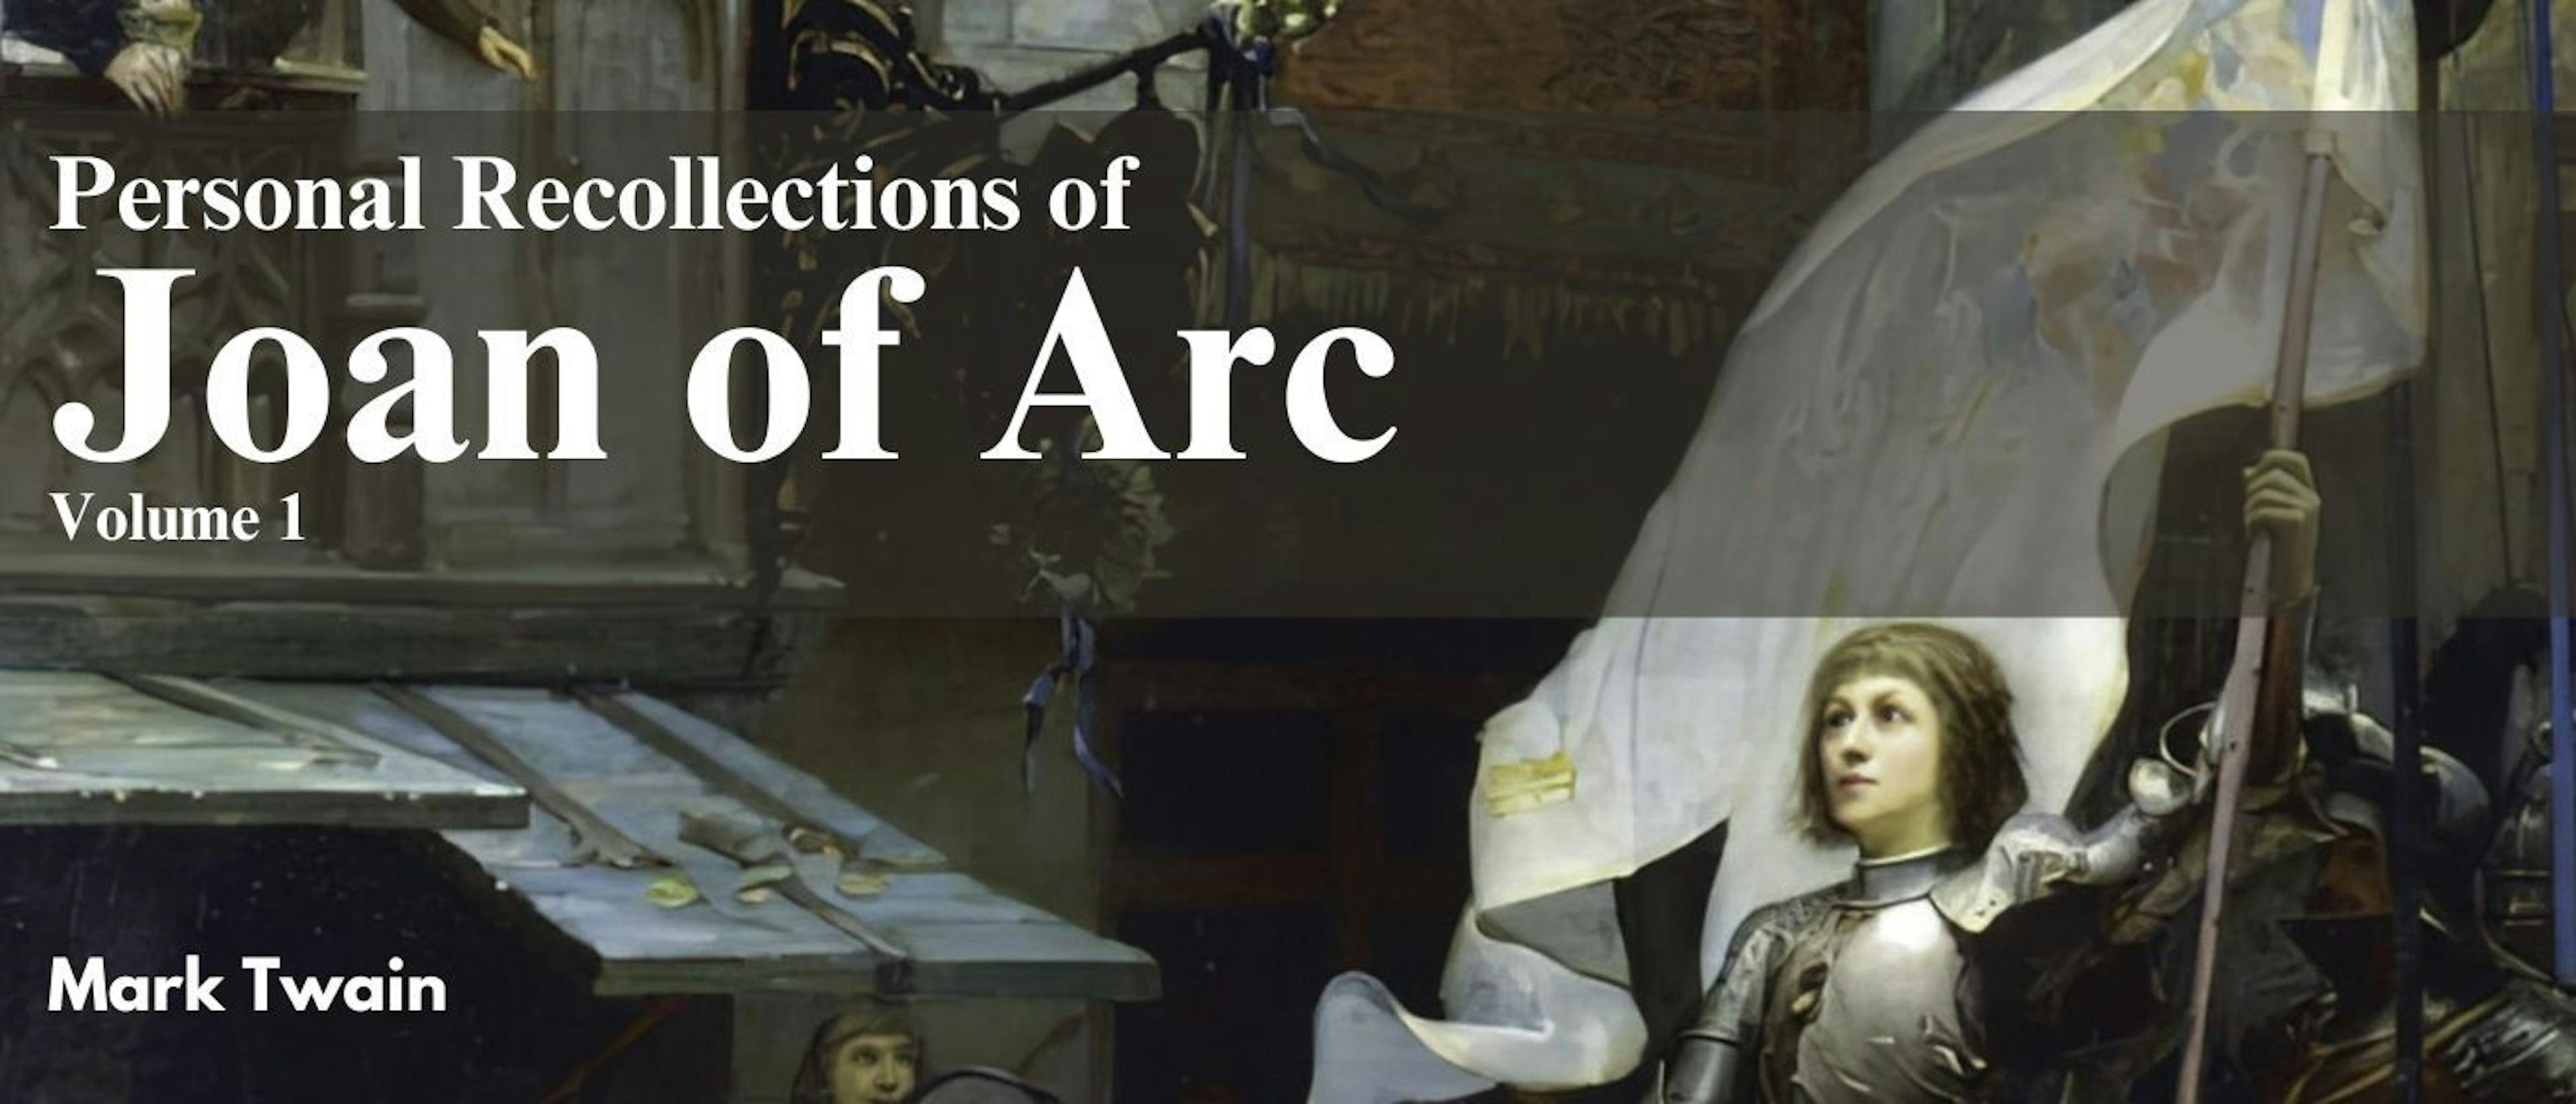 featured image - A PECULIARITY OF JOAN OF ARC’S HISTORY